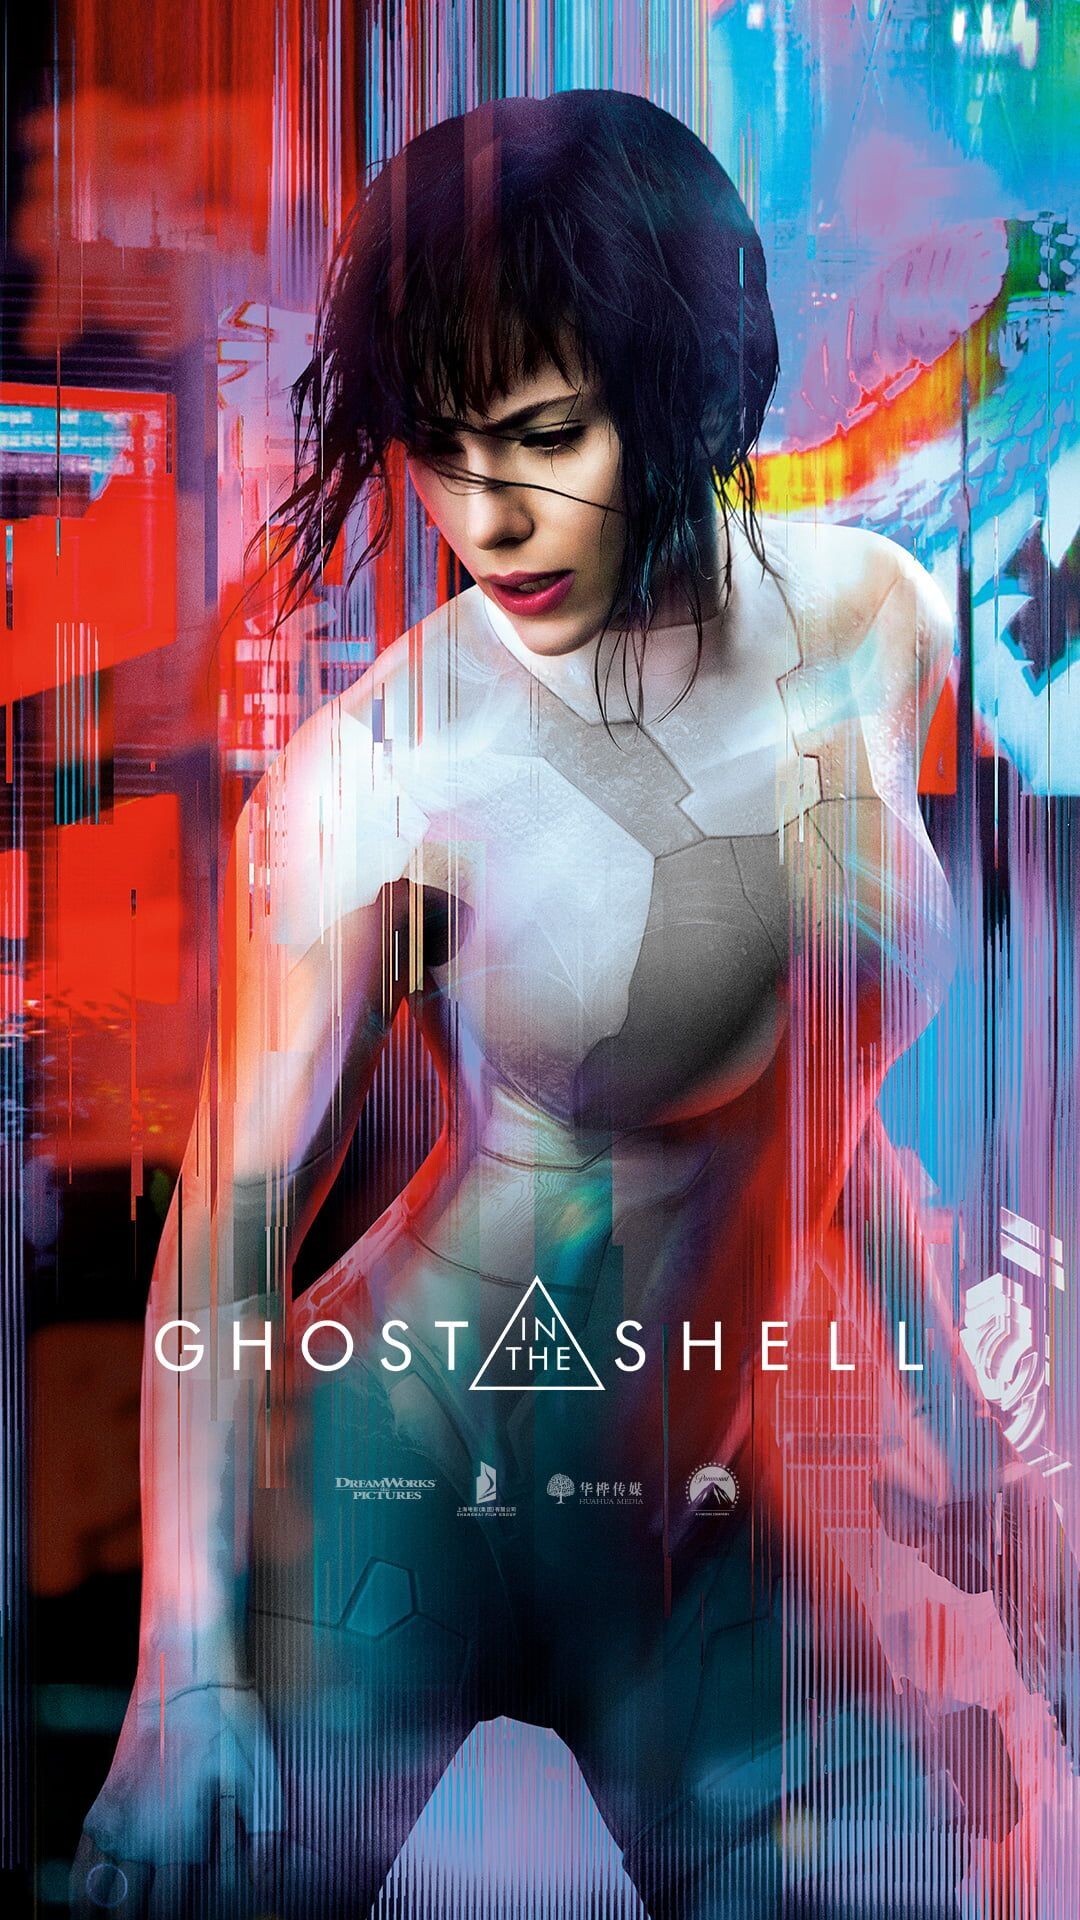 Ghost in the Shell (Movie): A 2017 science fiction action film, Paramount Pictures, DreamWorks, Amblin Partners. 1080x1920 Full HD Background.